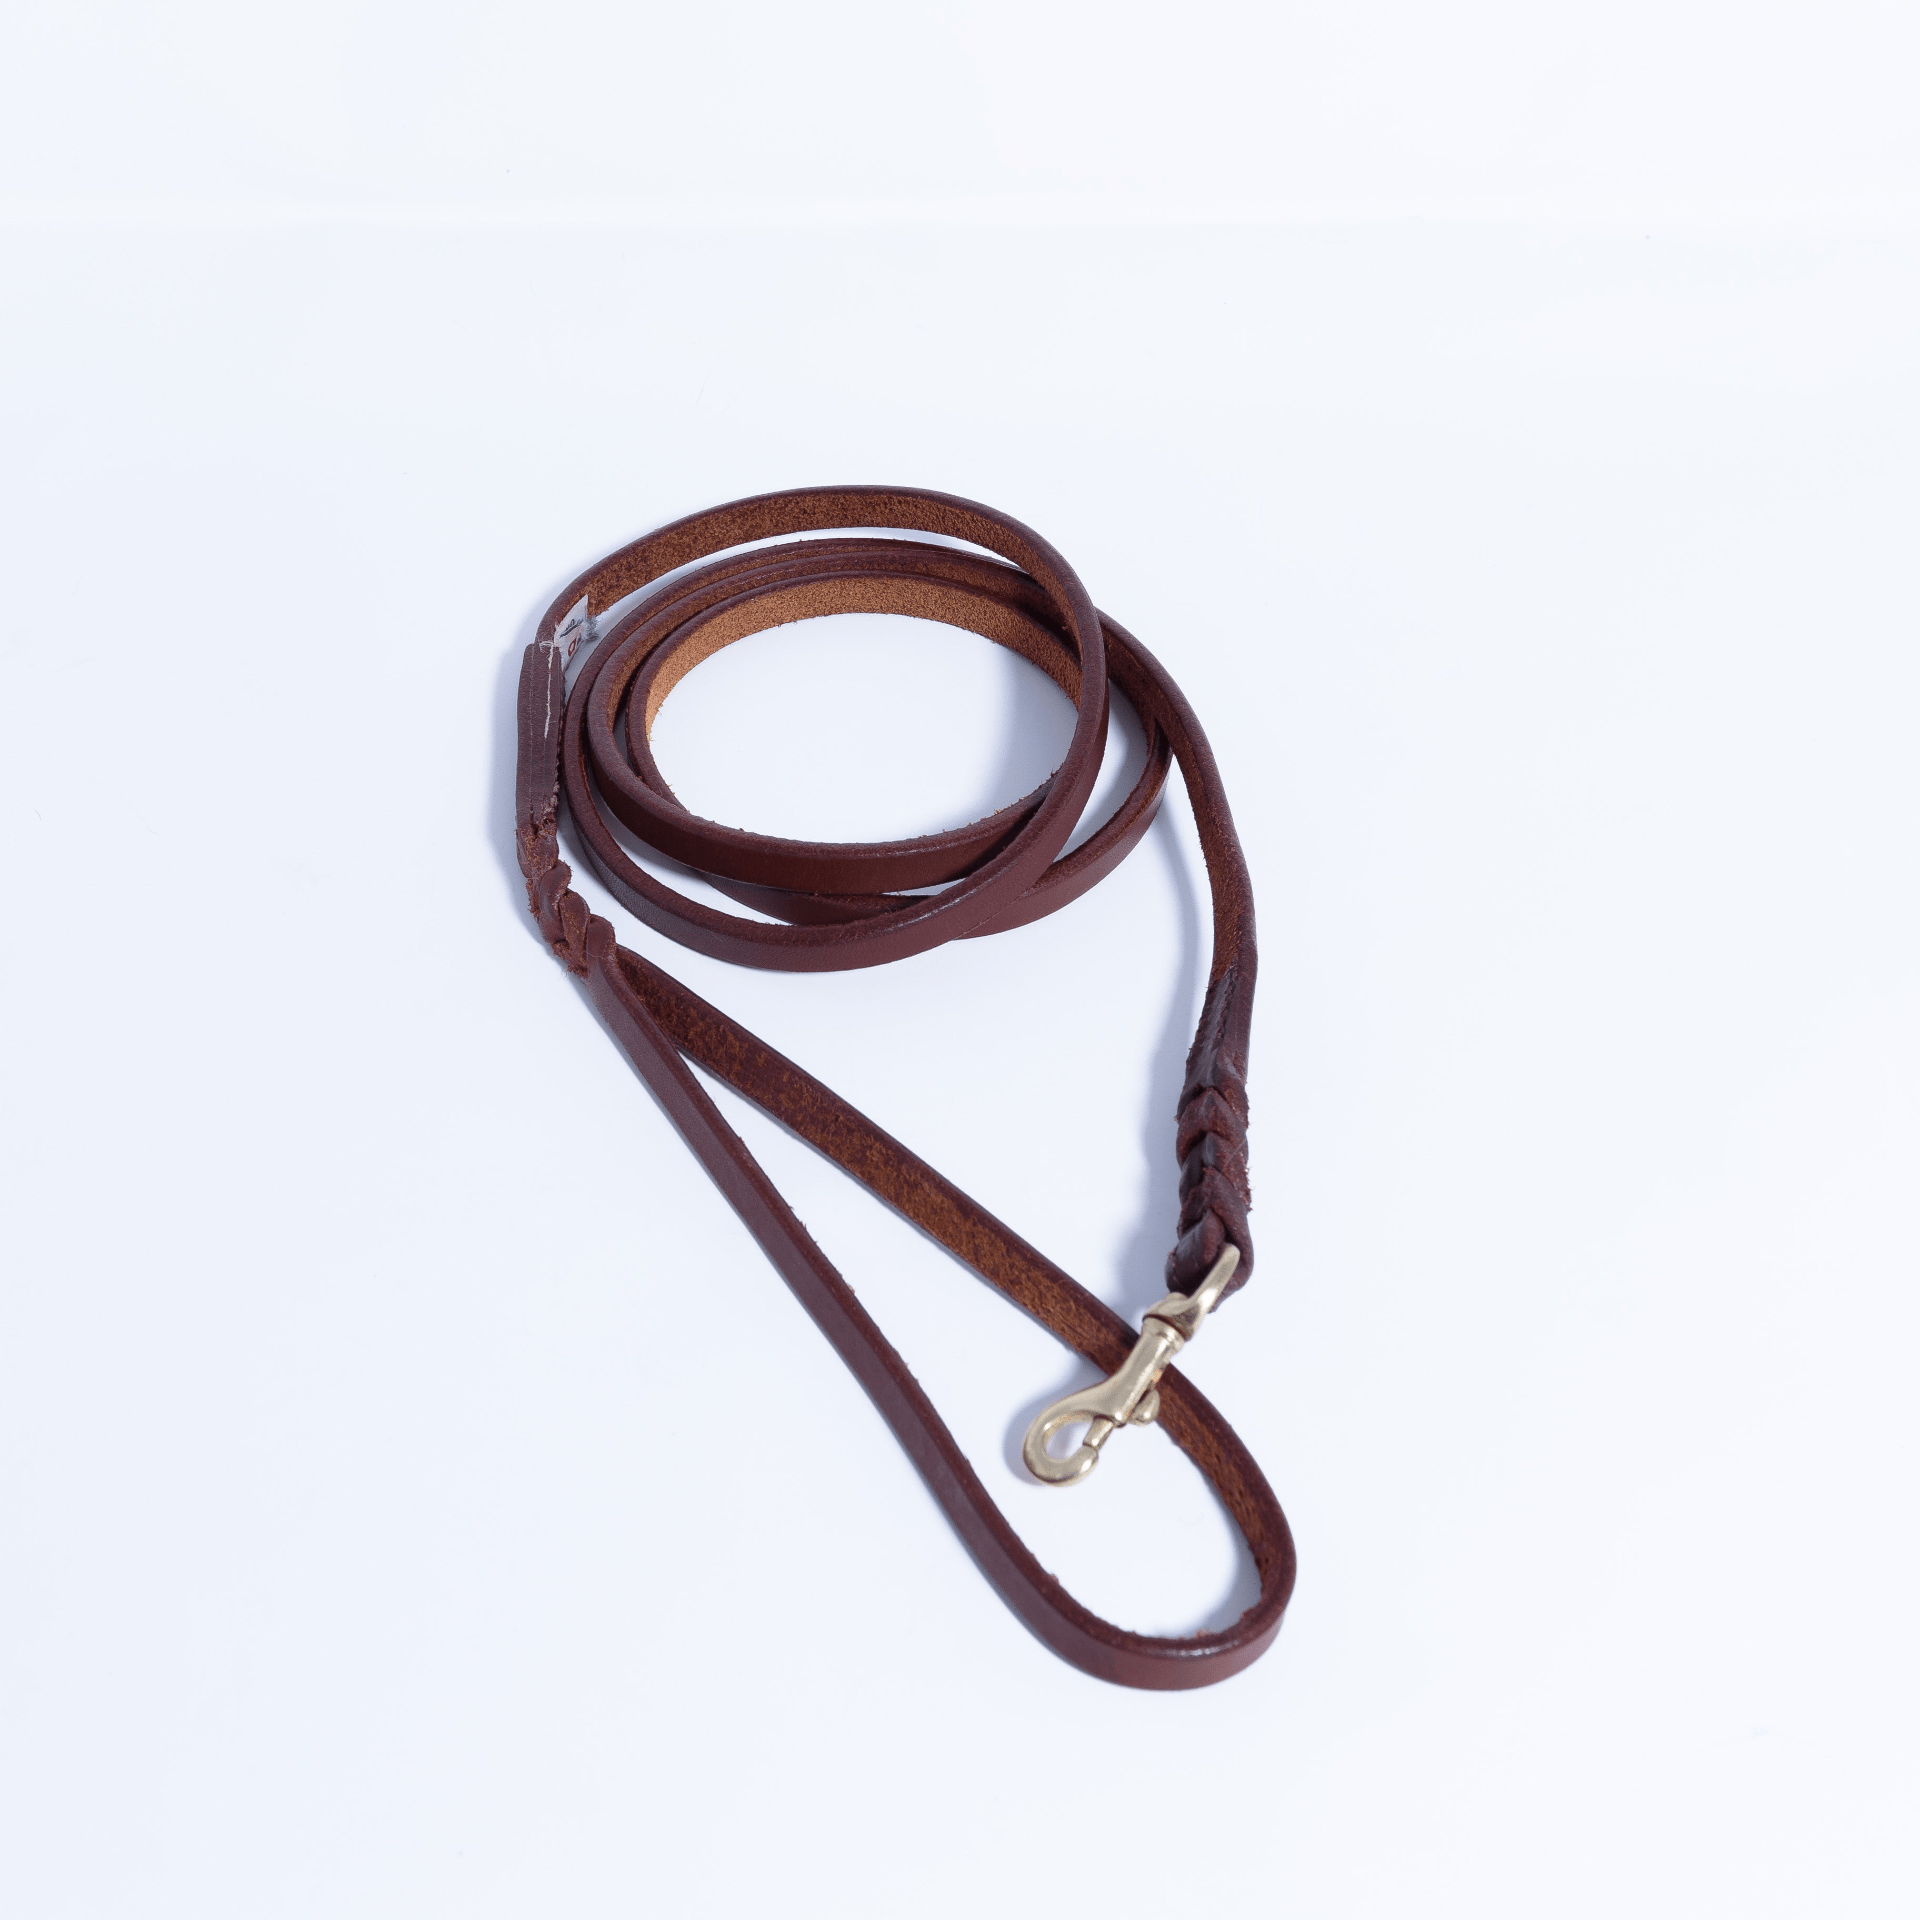 Dog and Pet Stuff Brown / 6’ x 1/2” Braided Leash